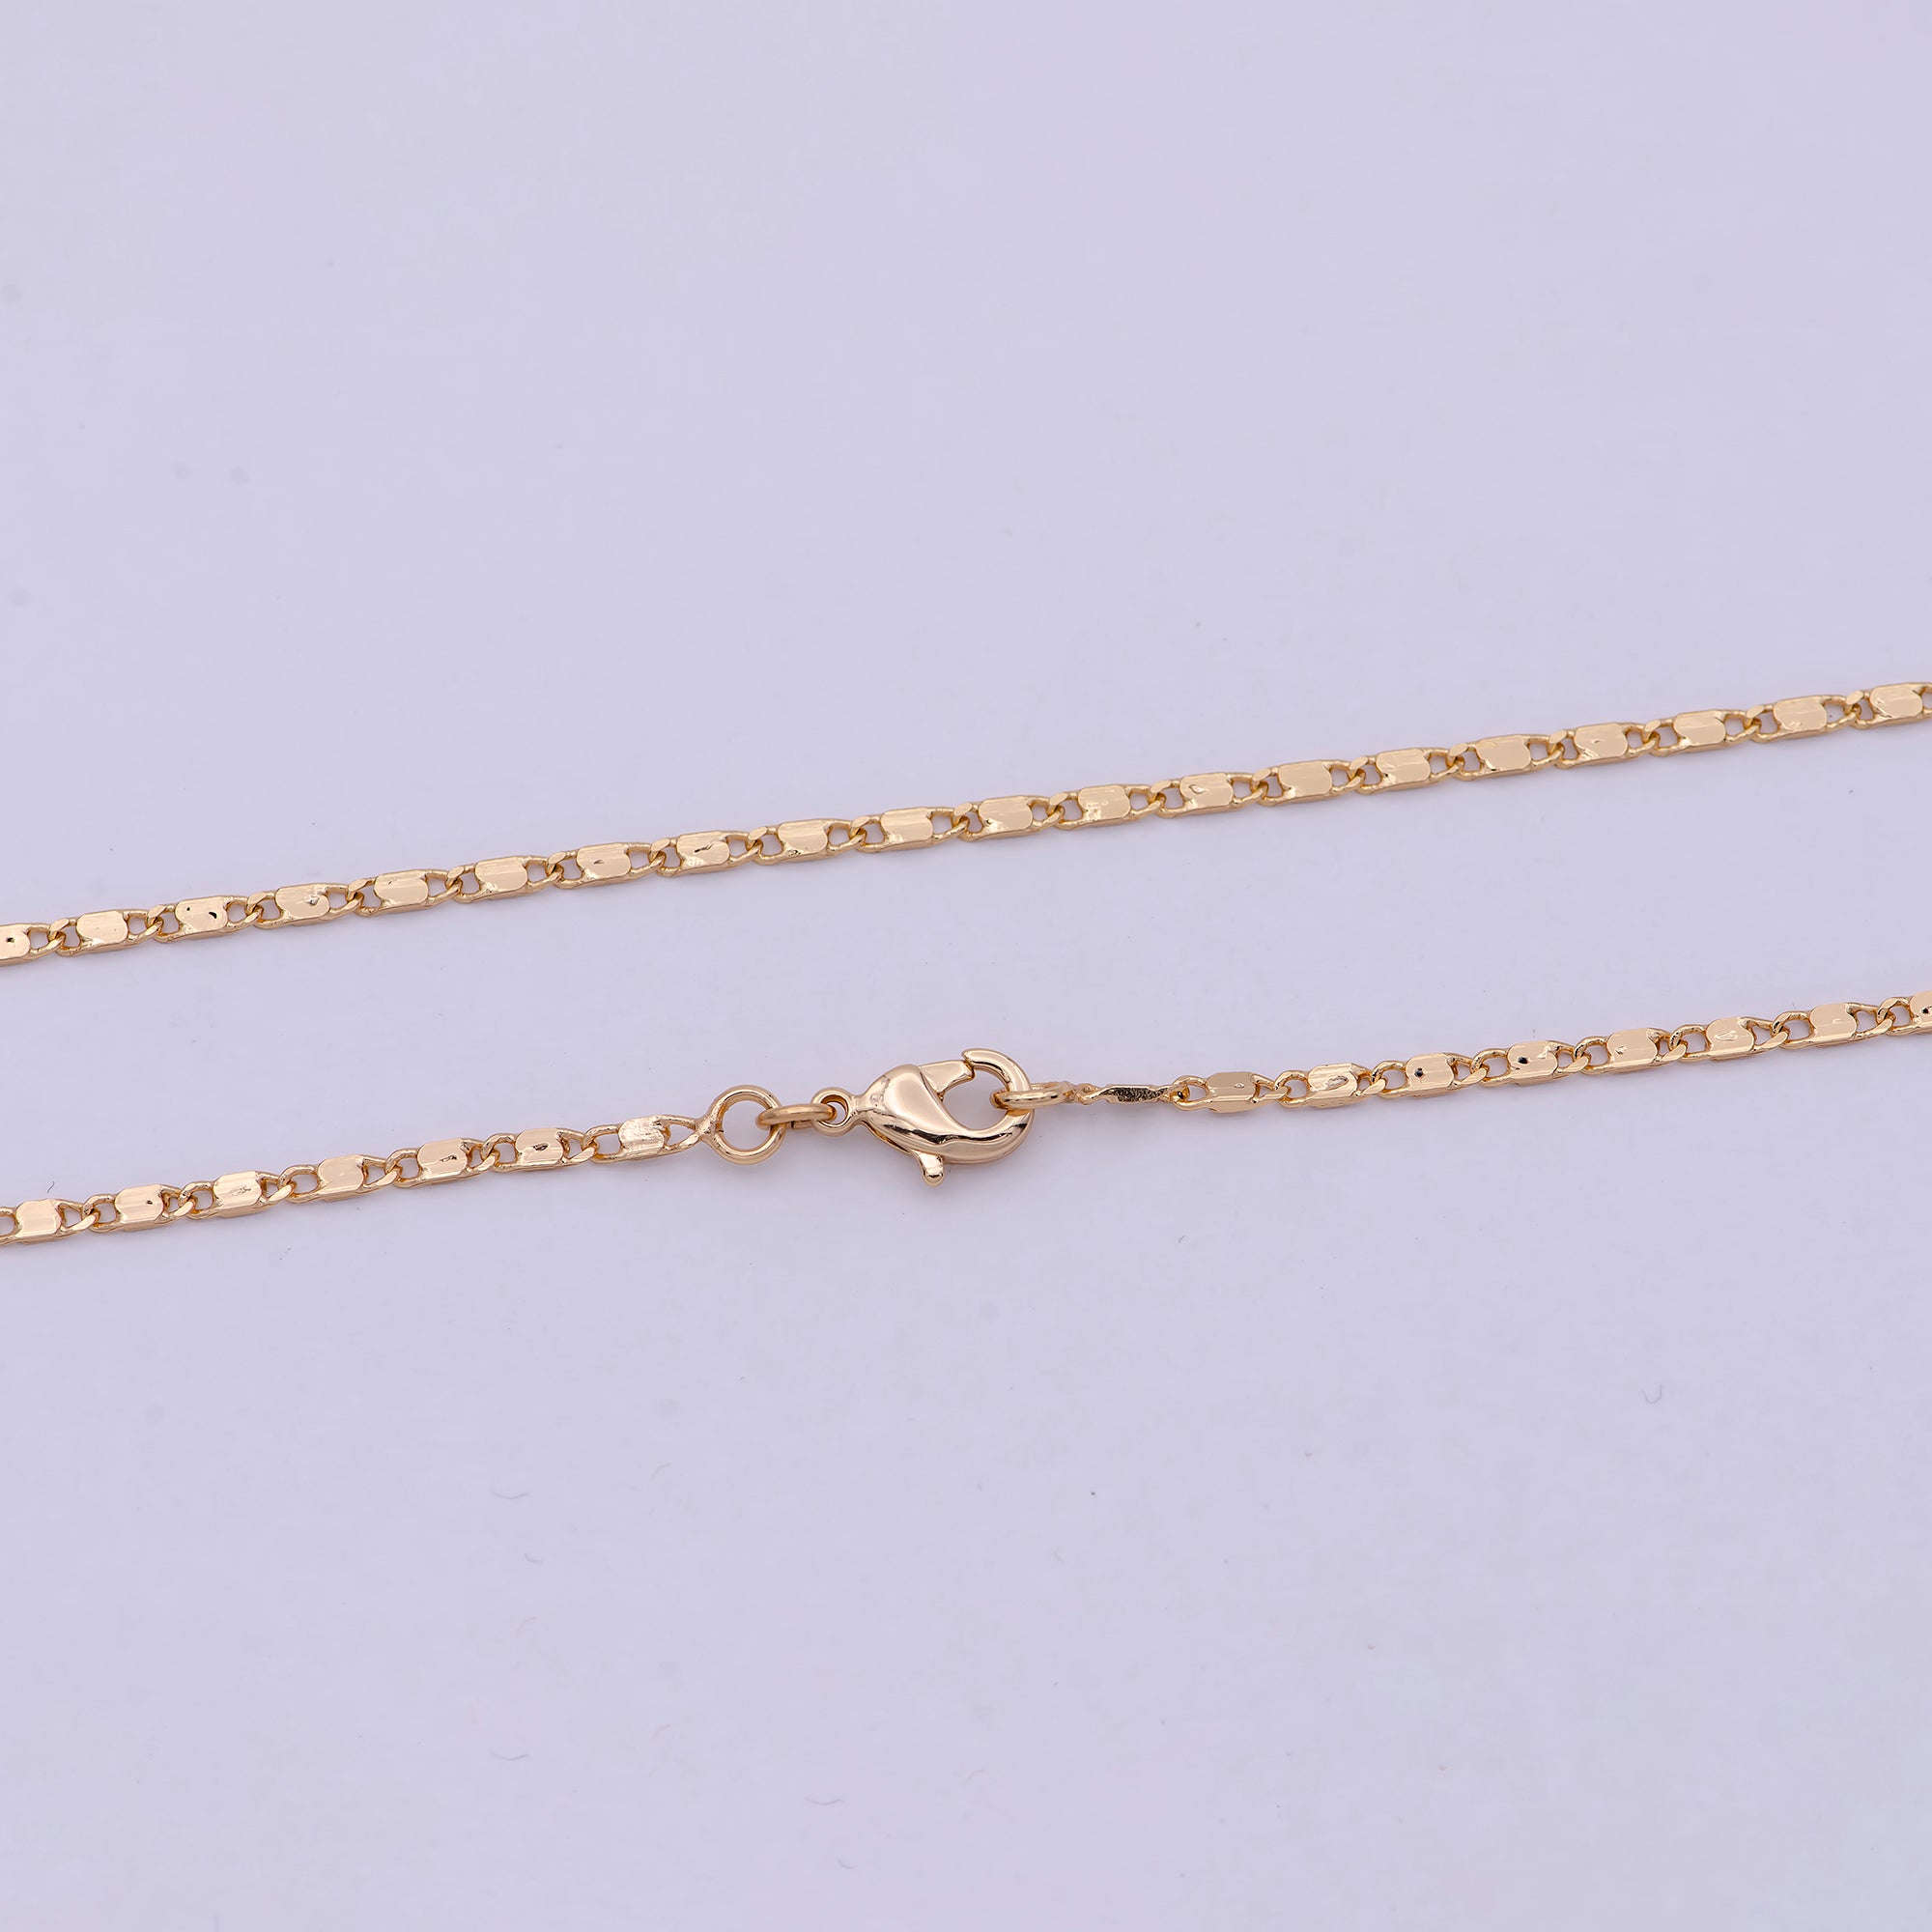 18k Gold Filled Chain Necklace, Fine Scroll Gold Chain, Simple Gold Necklace, Thin Plain Women's Necklace 18 inch long - DLUXCA